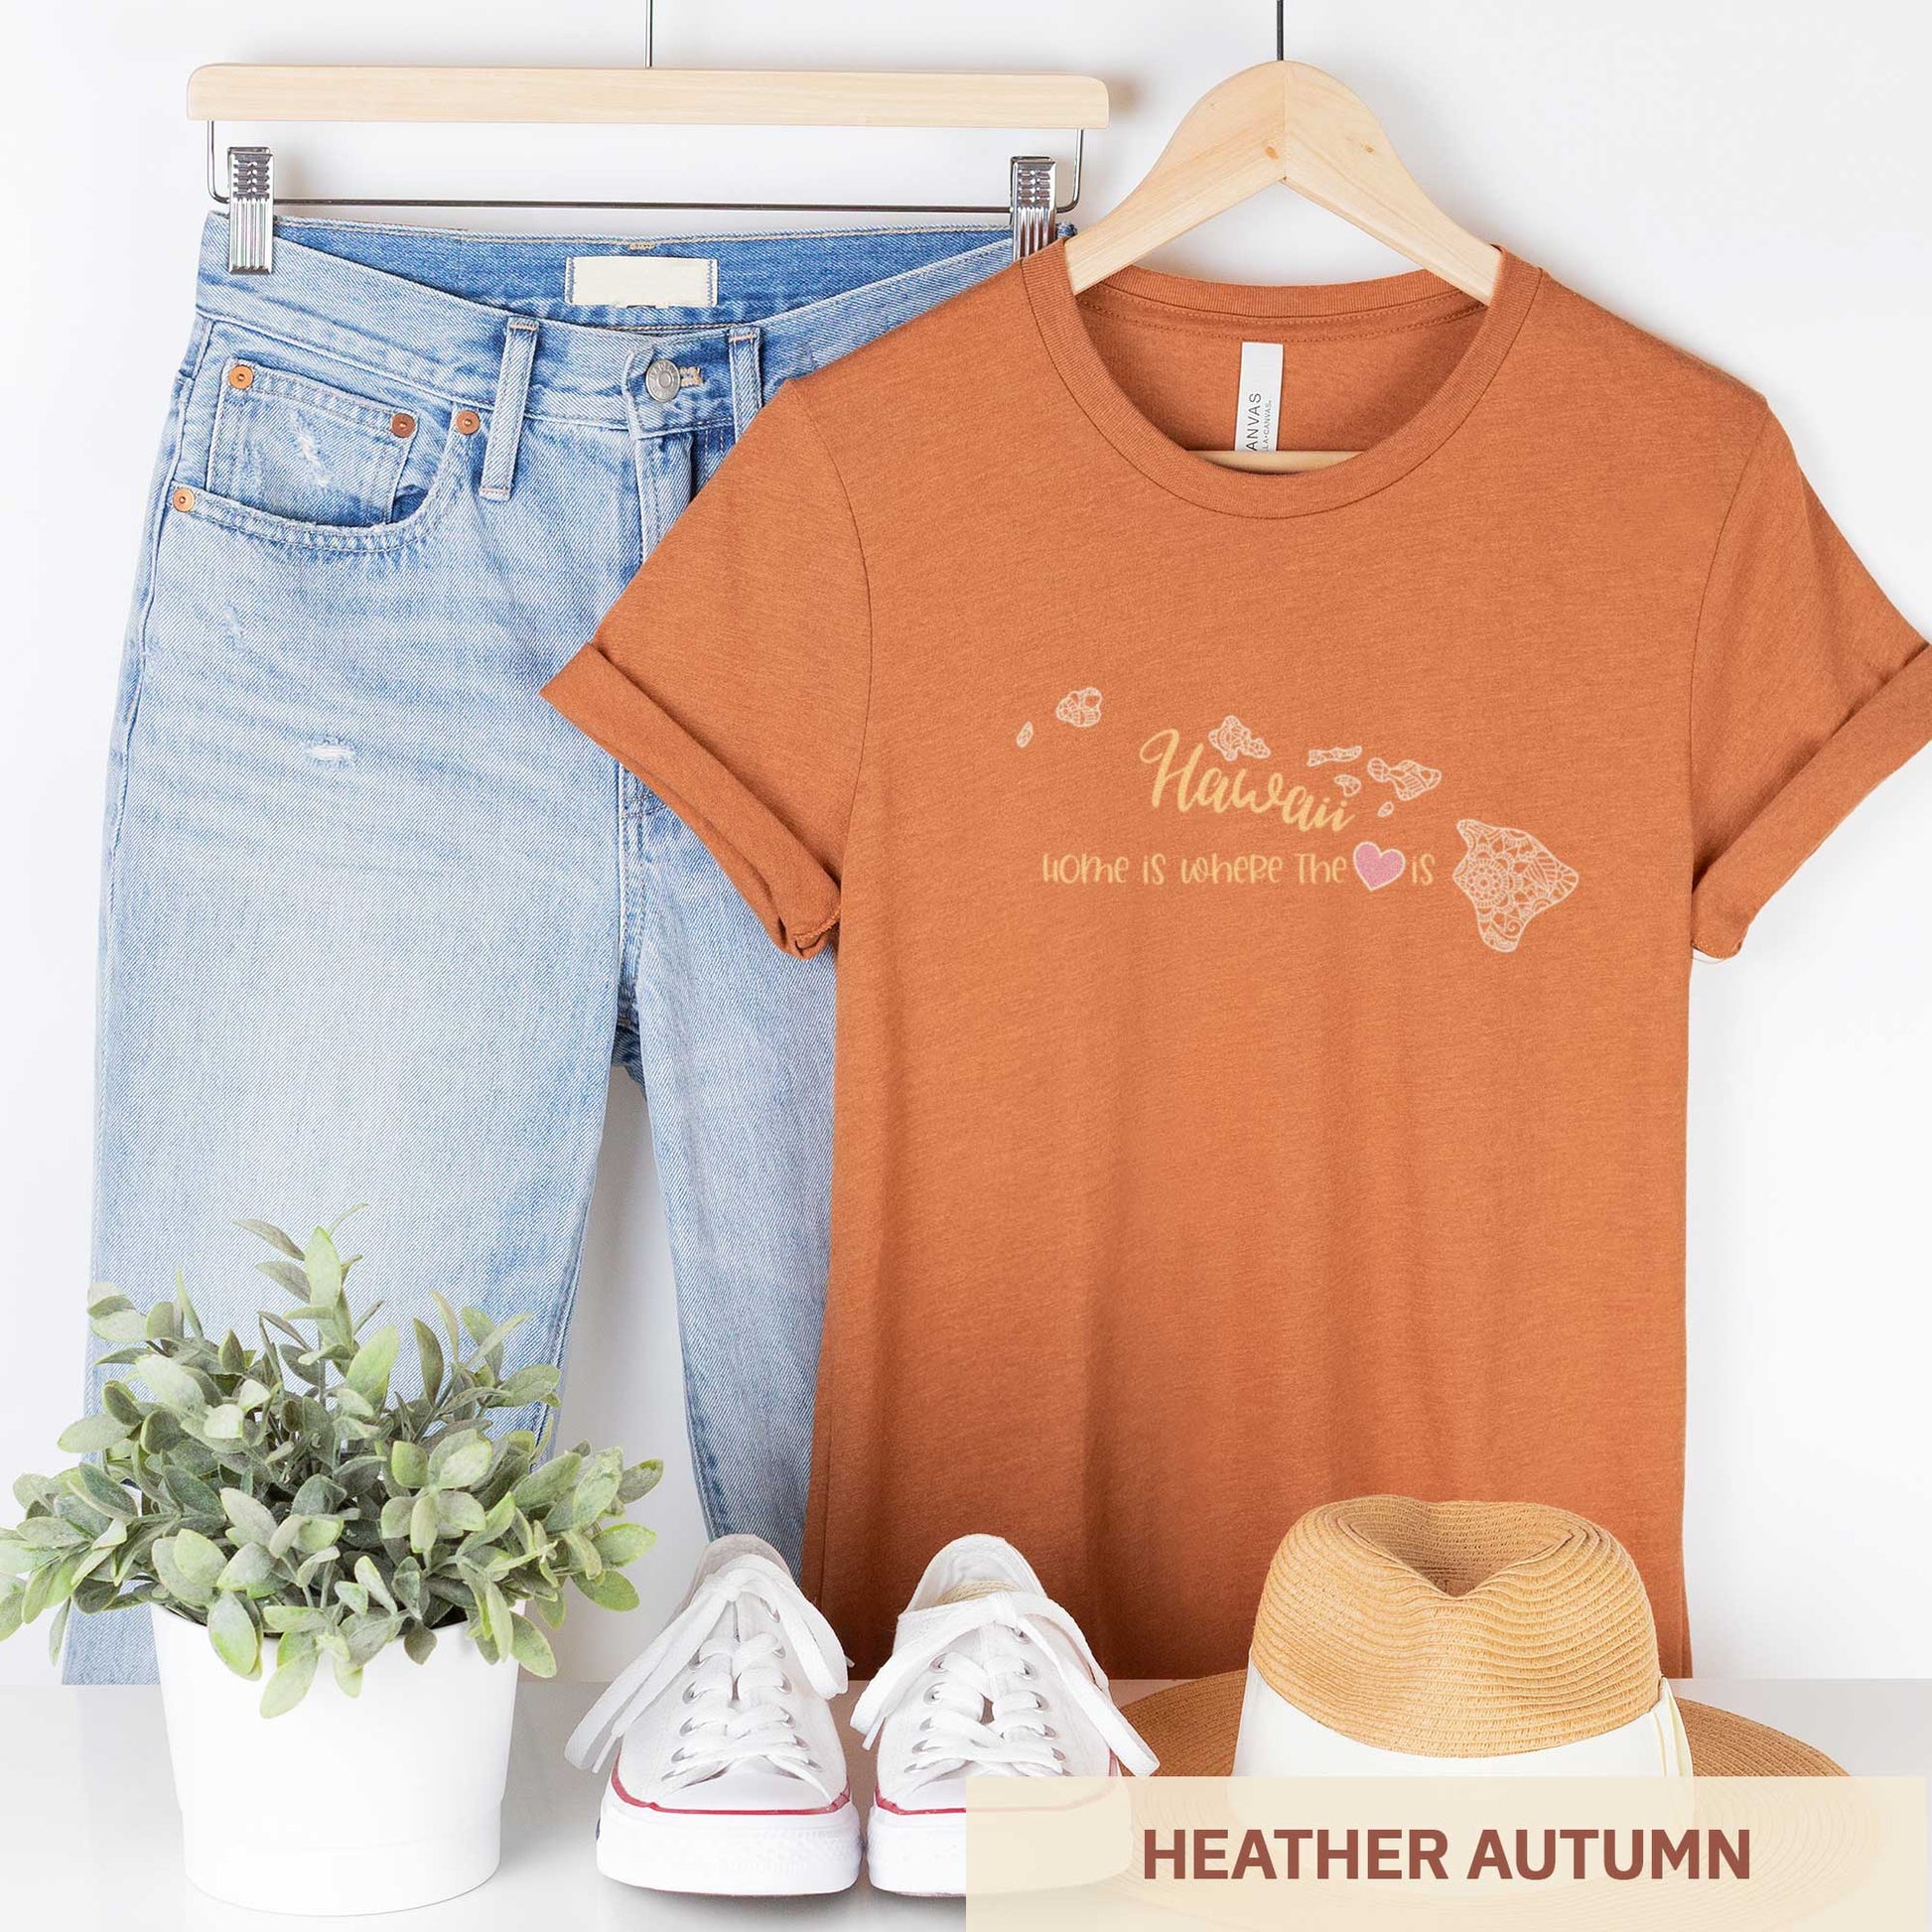 A hanging heather autumn Bella Canvas t-shirt featuring a mandala in the shape of Hawaii with the words home is where the heart is.